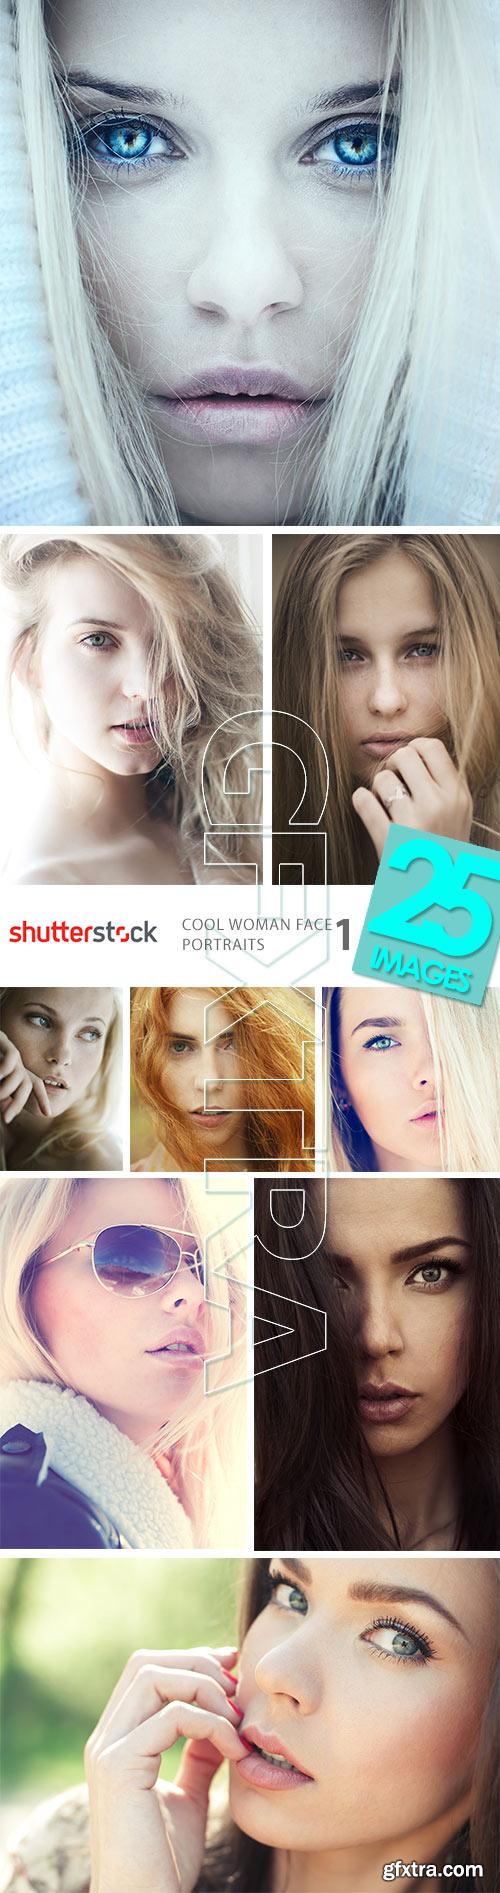 Cool Woman Face Portraits I, 25xJPG